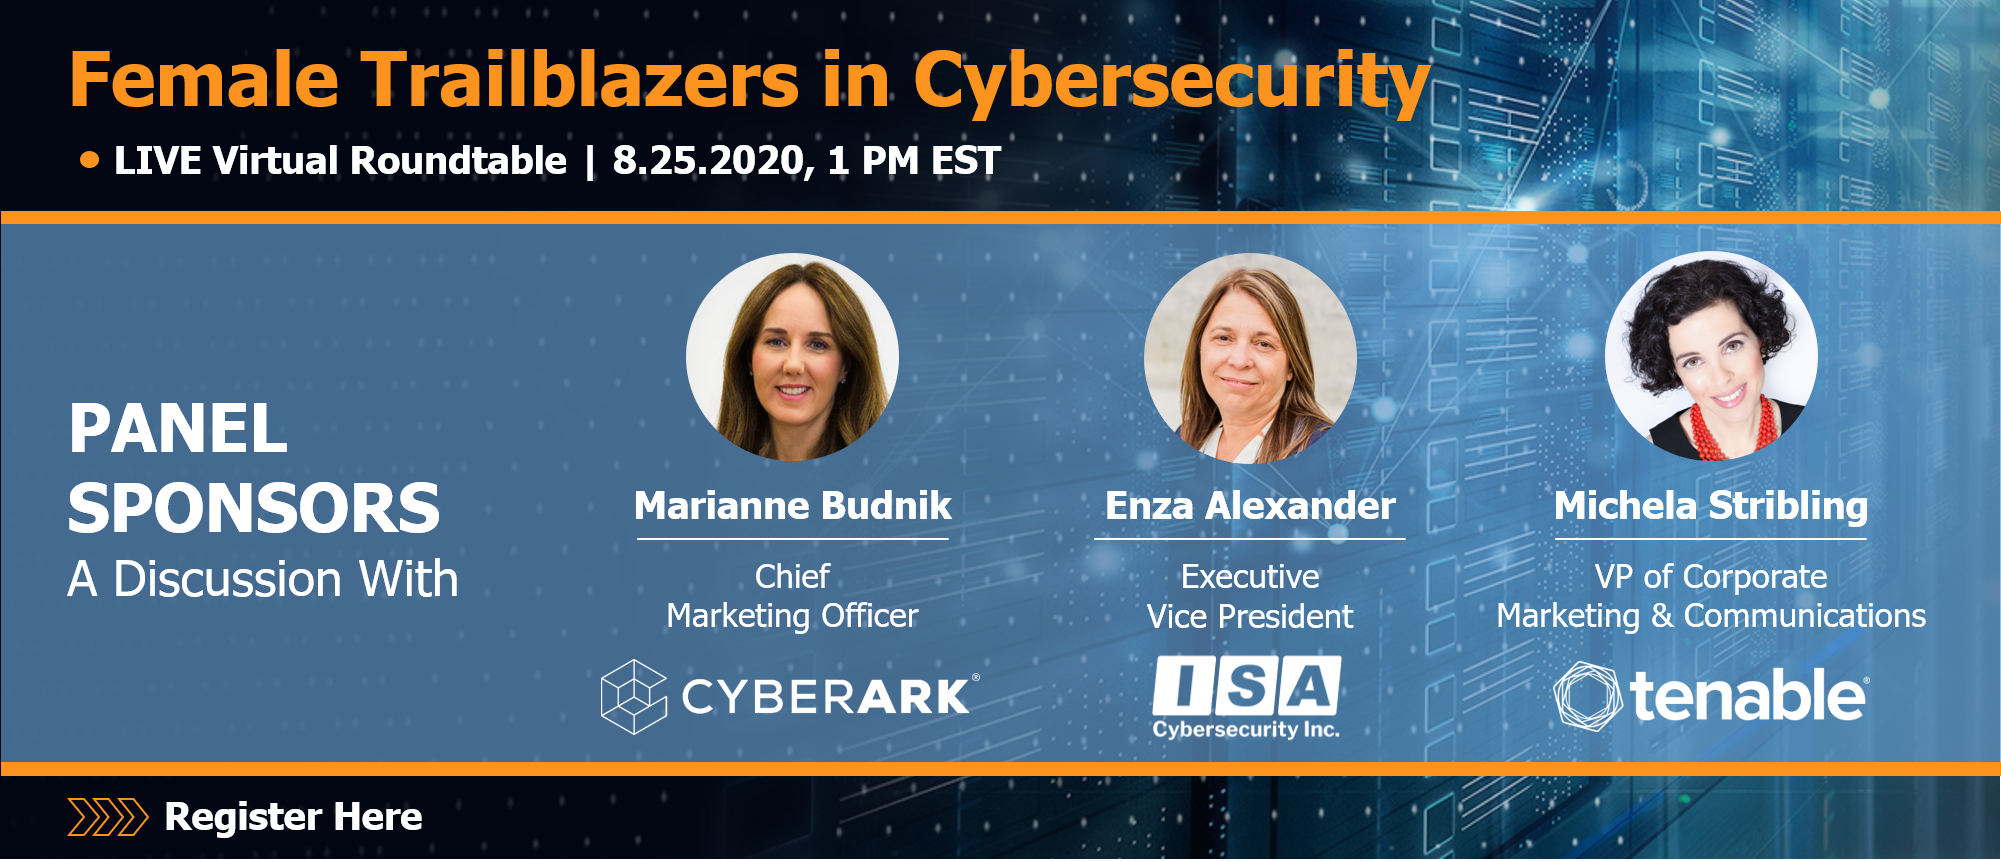 Female Trailblazers in Cybersecurity - Email Bottom Banner